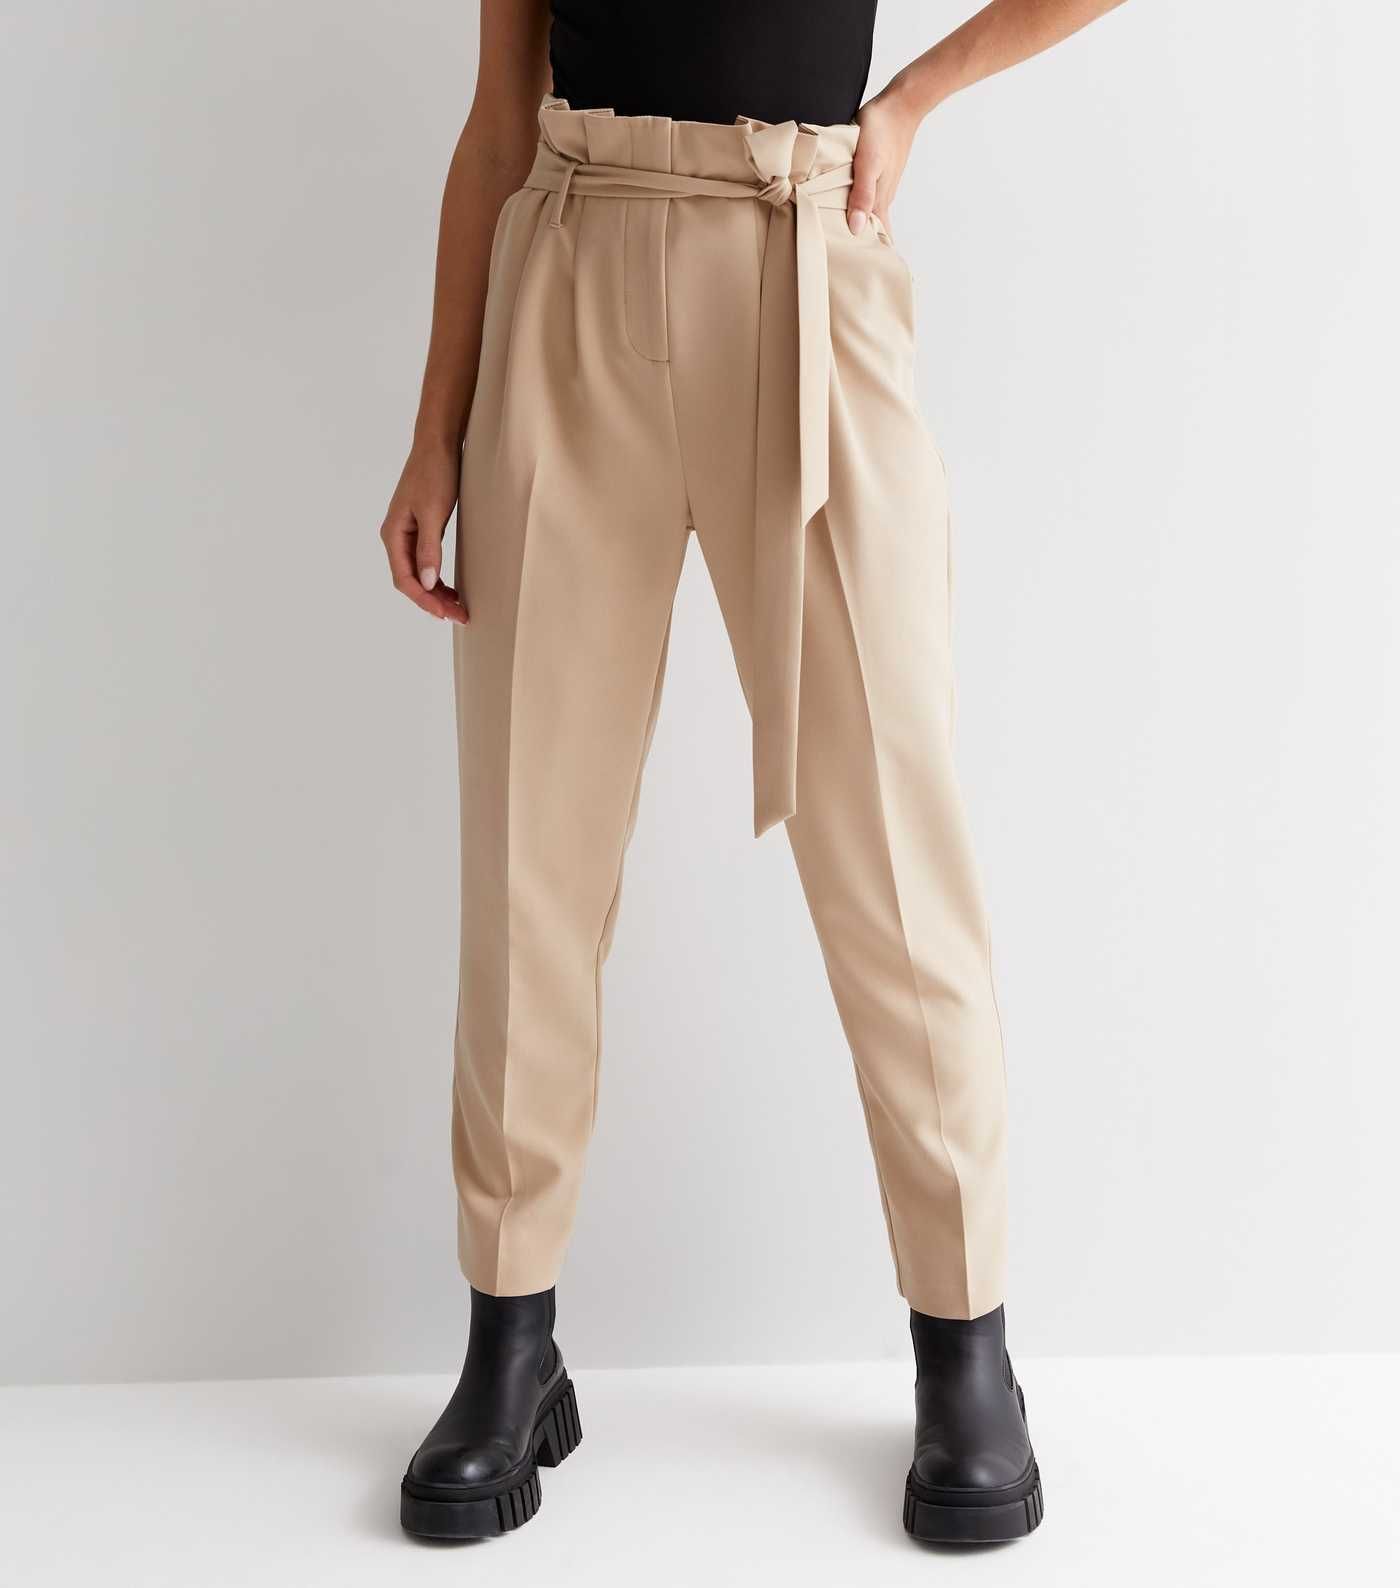 Petite Stone Paperbag Trousers
						
						Add to Saved Items
						Remove from Saved Items | New Look (UK)